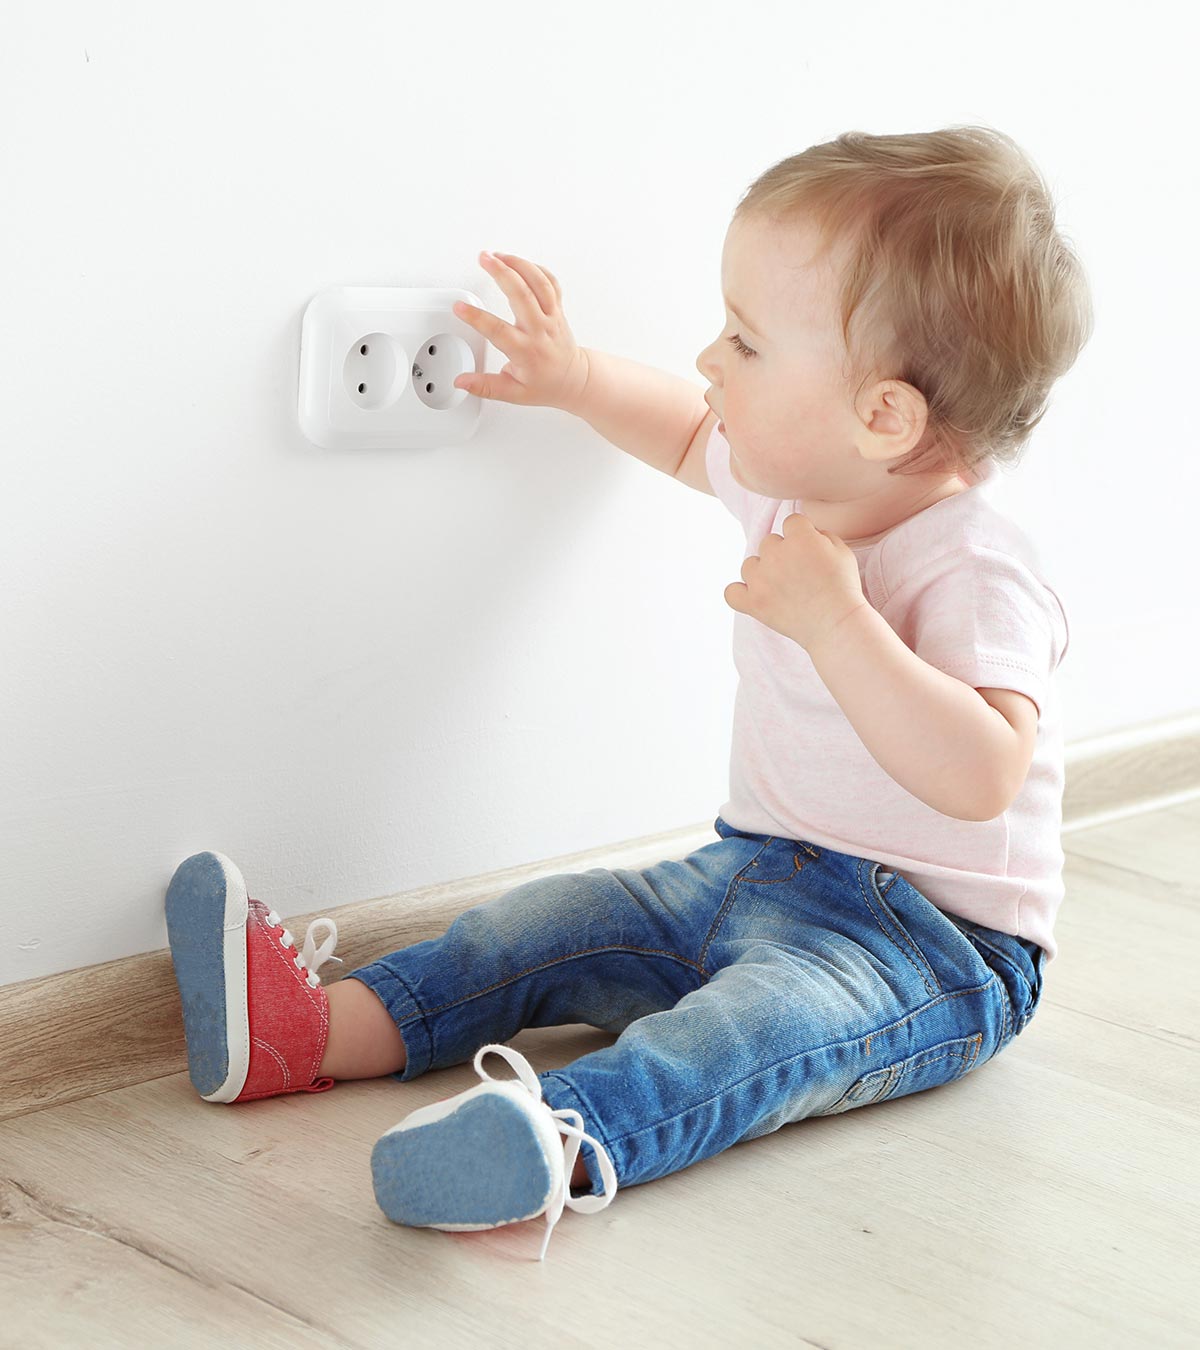 6x 2 Plug Baby Child Infant Kids Plug Covers Safety Power Electric Outlet WQ 